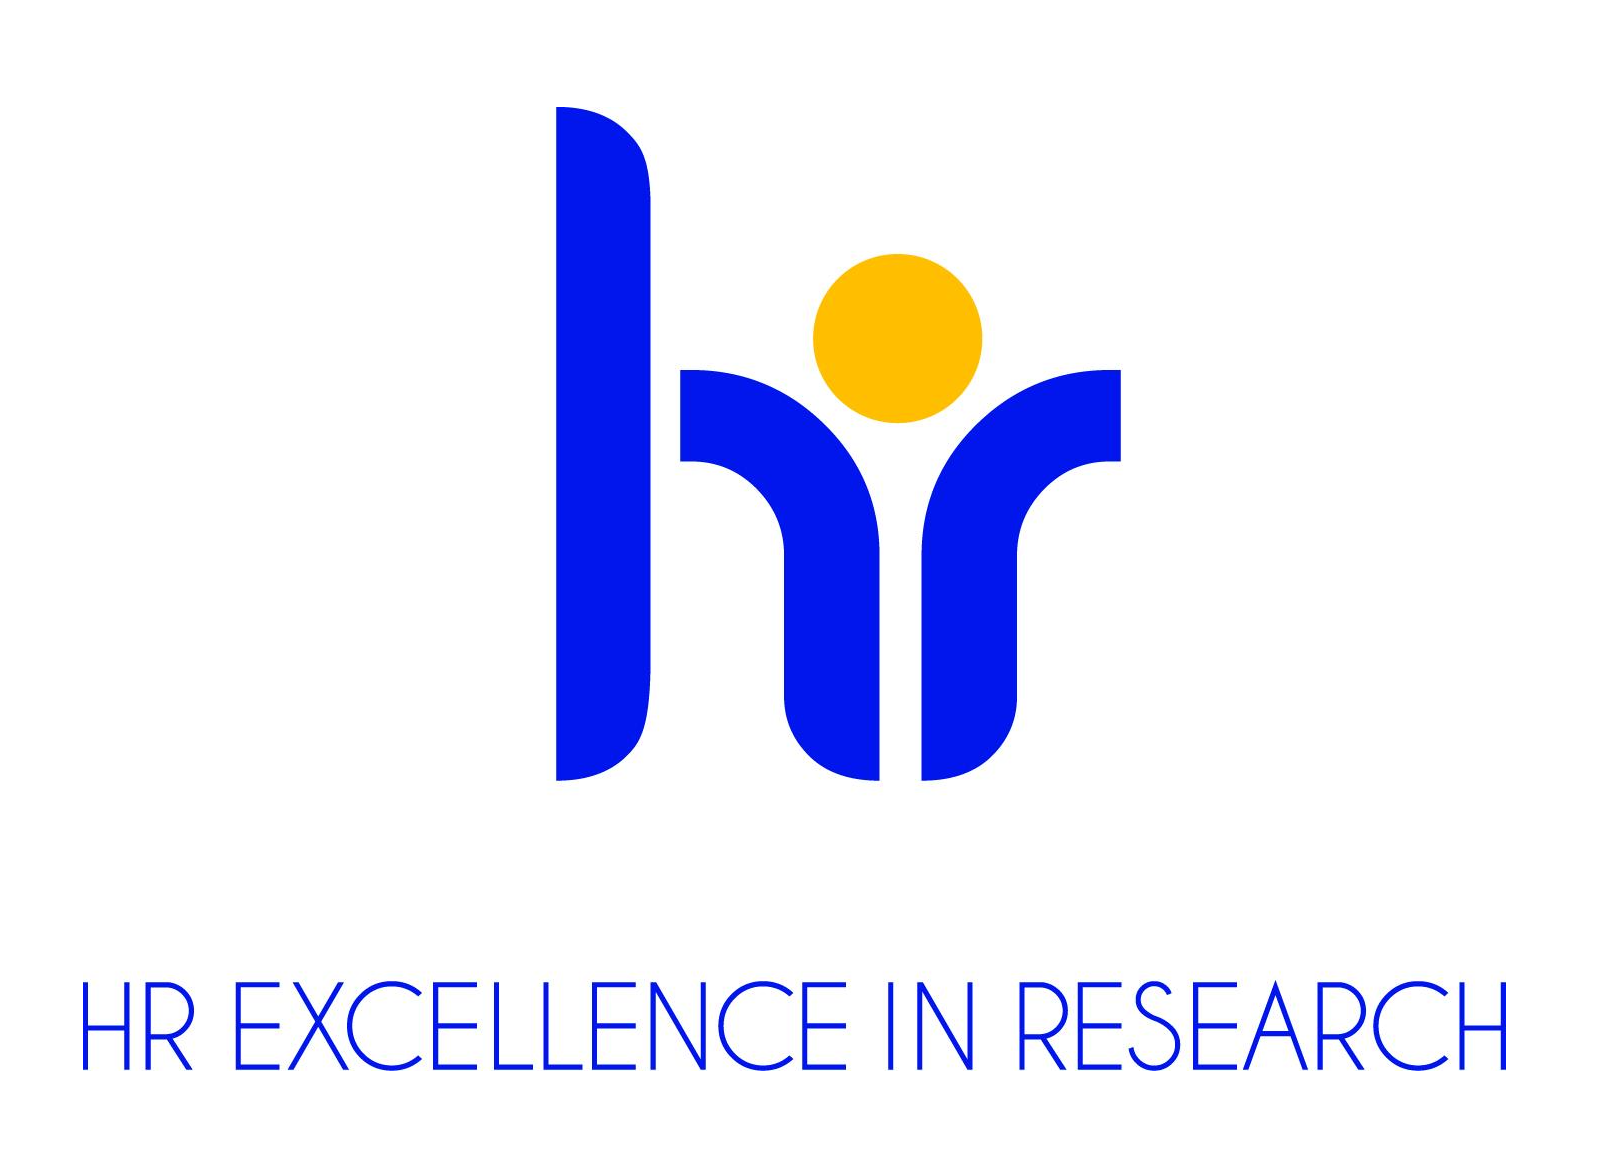 Logo of HR Excellence in Research